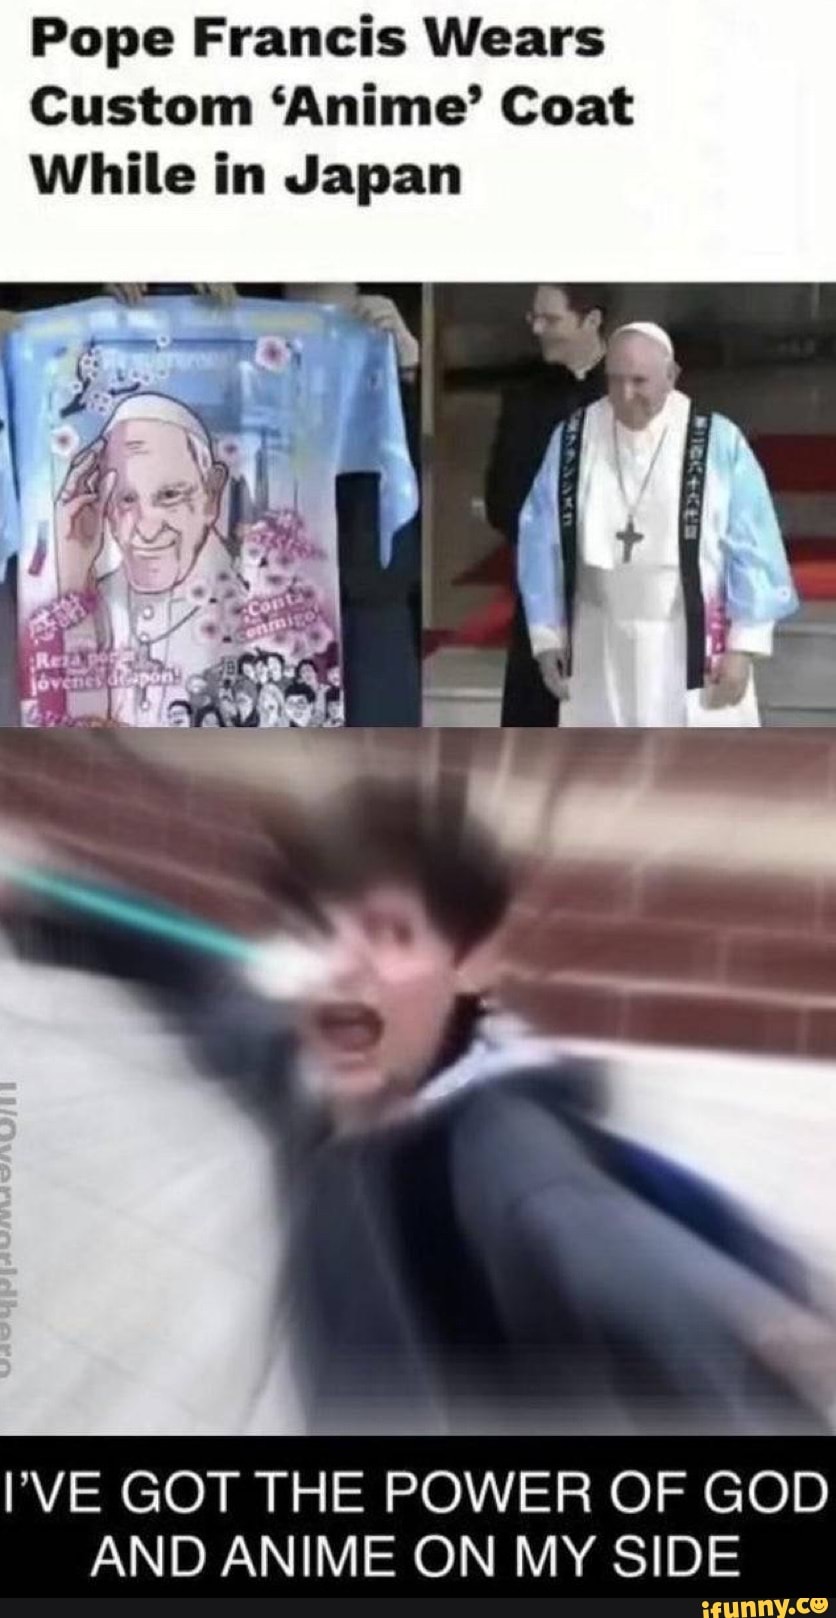 Pope Francis Wears Custom Anime Coat While In Japan Pve Got The Power Of God And Anime On My Side Ifunny So they become super saiyan naval attorneys now? pope francis wears custom anime coat